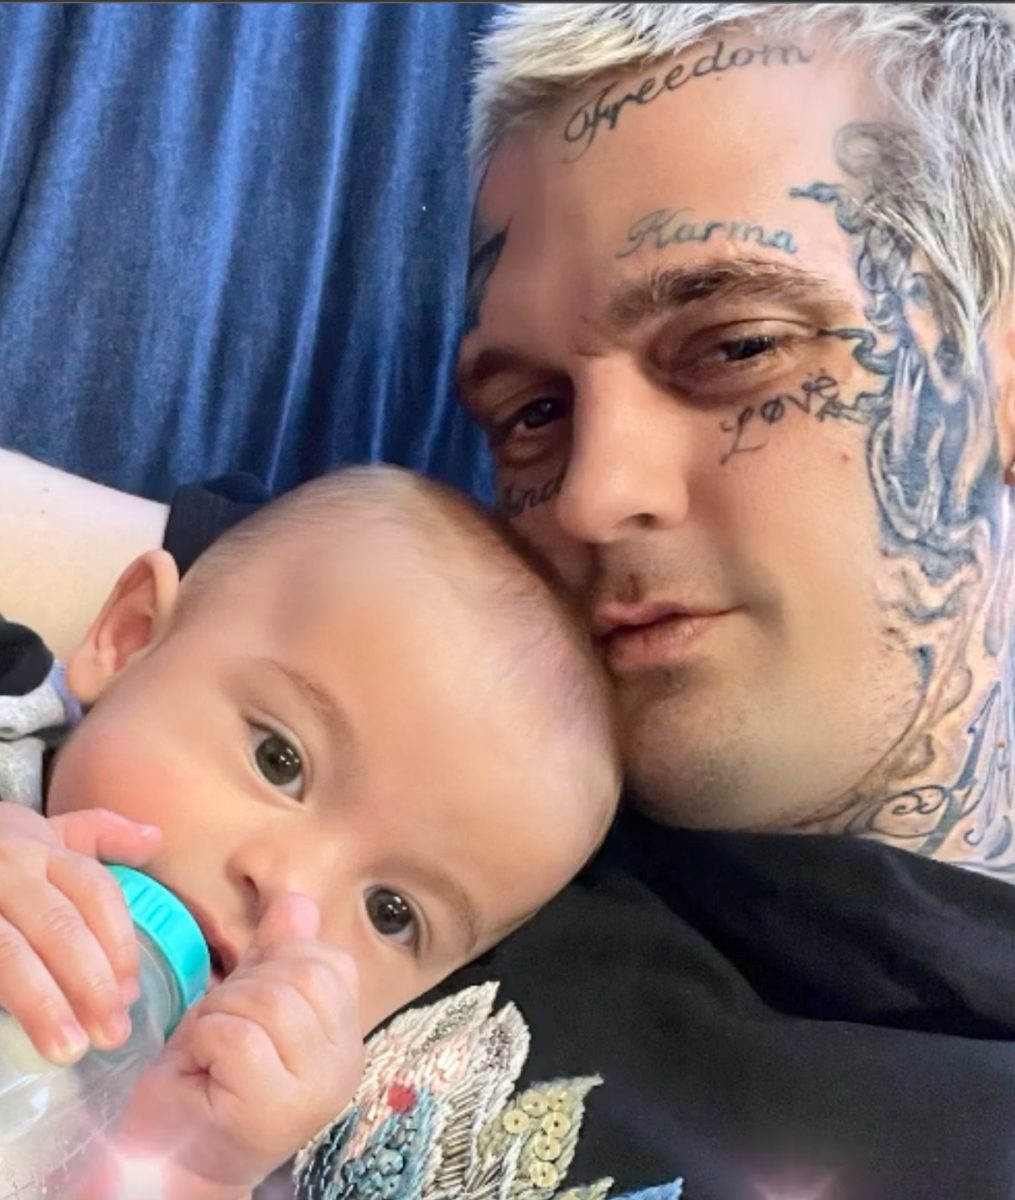 melanie martin regains full custody of her son with aaron carter: “aaron would have been ecstatic” | melanie martin is finally regaining full custody of her one-year-old son, prince, who she shared with aaron carter before his unexpected death last month.